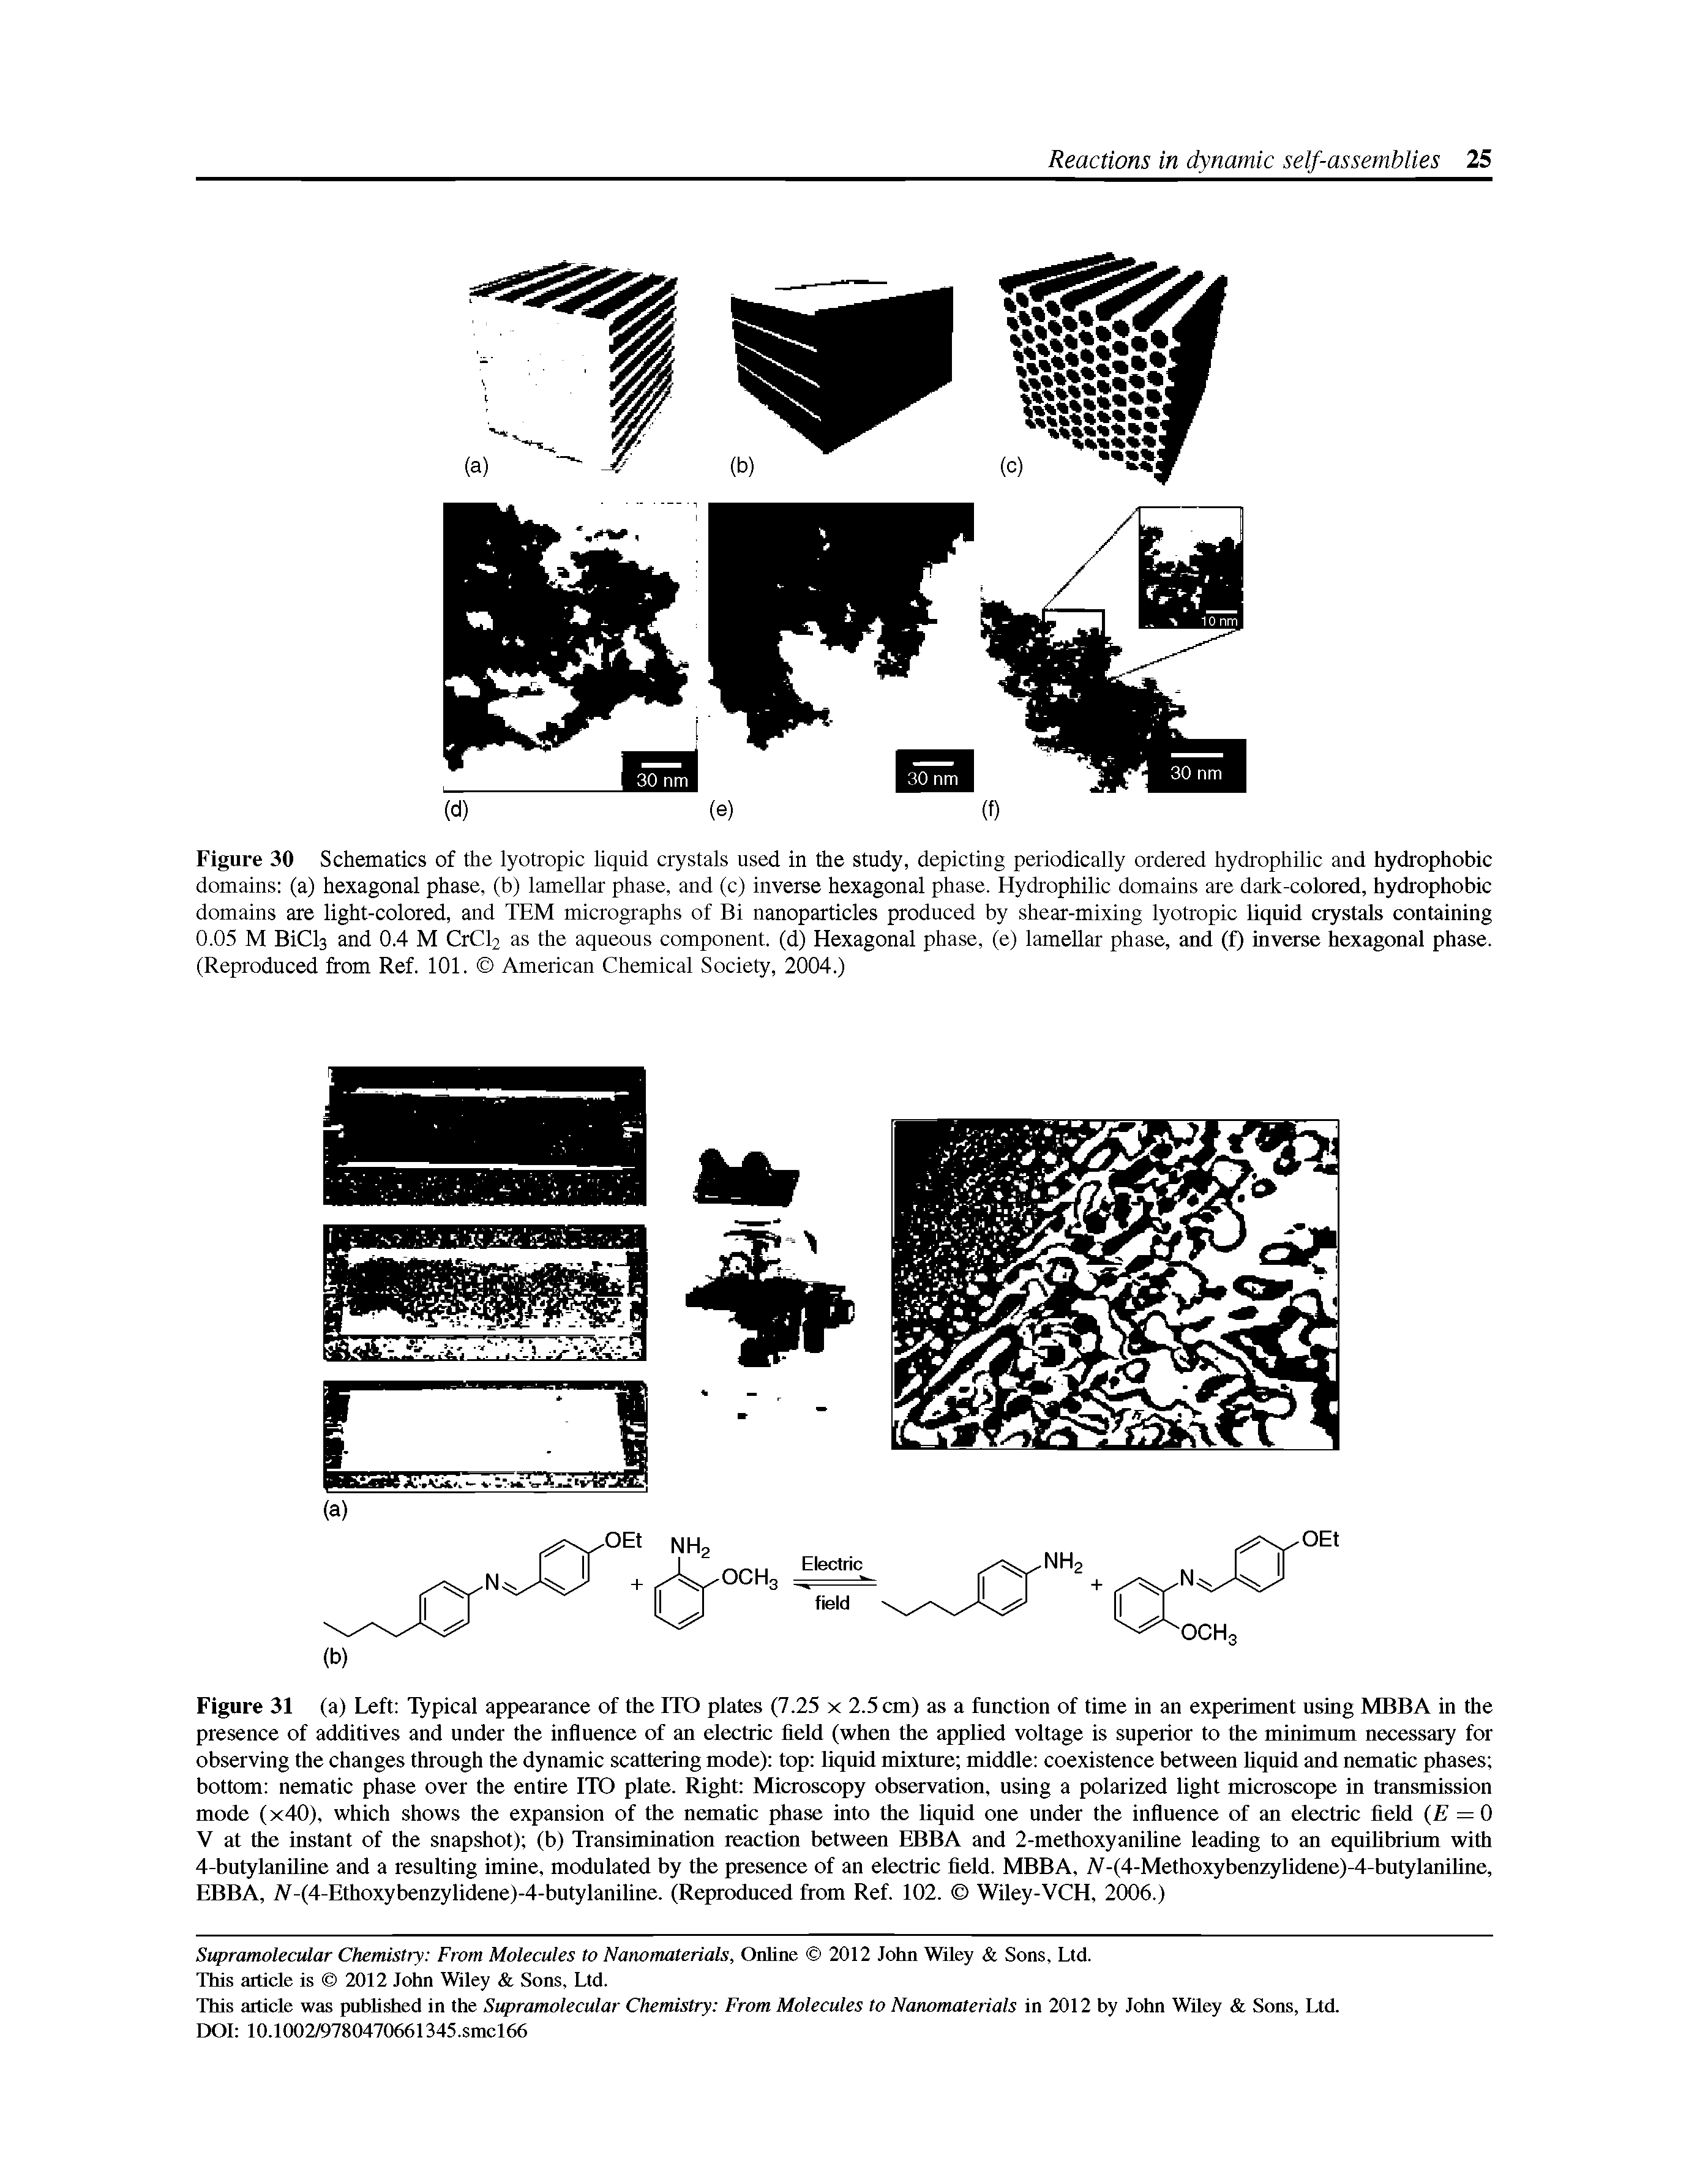 Figure 30 Schematics of the lyotropic liquid crystals used in the study, depicting periodically ordered hydrophilic and hydrophobic domains (a) hexagonal phase, (b) lamellar phase, and (c) inverse hexagonal phase. Hydrophilic domains are dark-colored, hydrophobic domains are light-colored, and TEM micrographs of Bi nanoparticles produced by shear-mixing lyotropic liquid crystals containing 0.05 M BiCls and 0.4 M C1CI2 as the aqueous component, (d) Hexagonal phase, (e) lamellar phase, and (f) invase hexagonal phase. (Reproduced from Ref. 101. American Chemical Society, 2004.)...